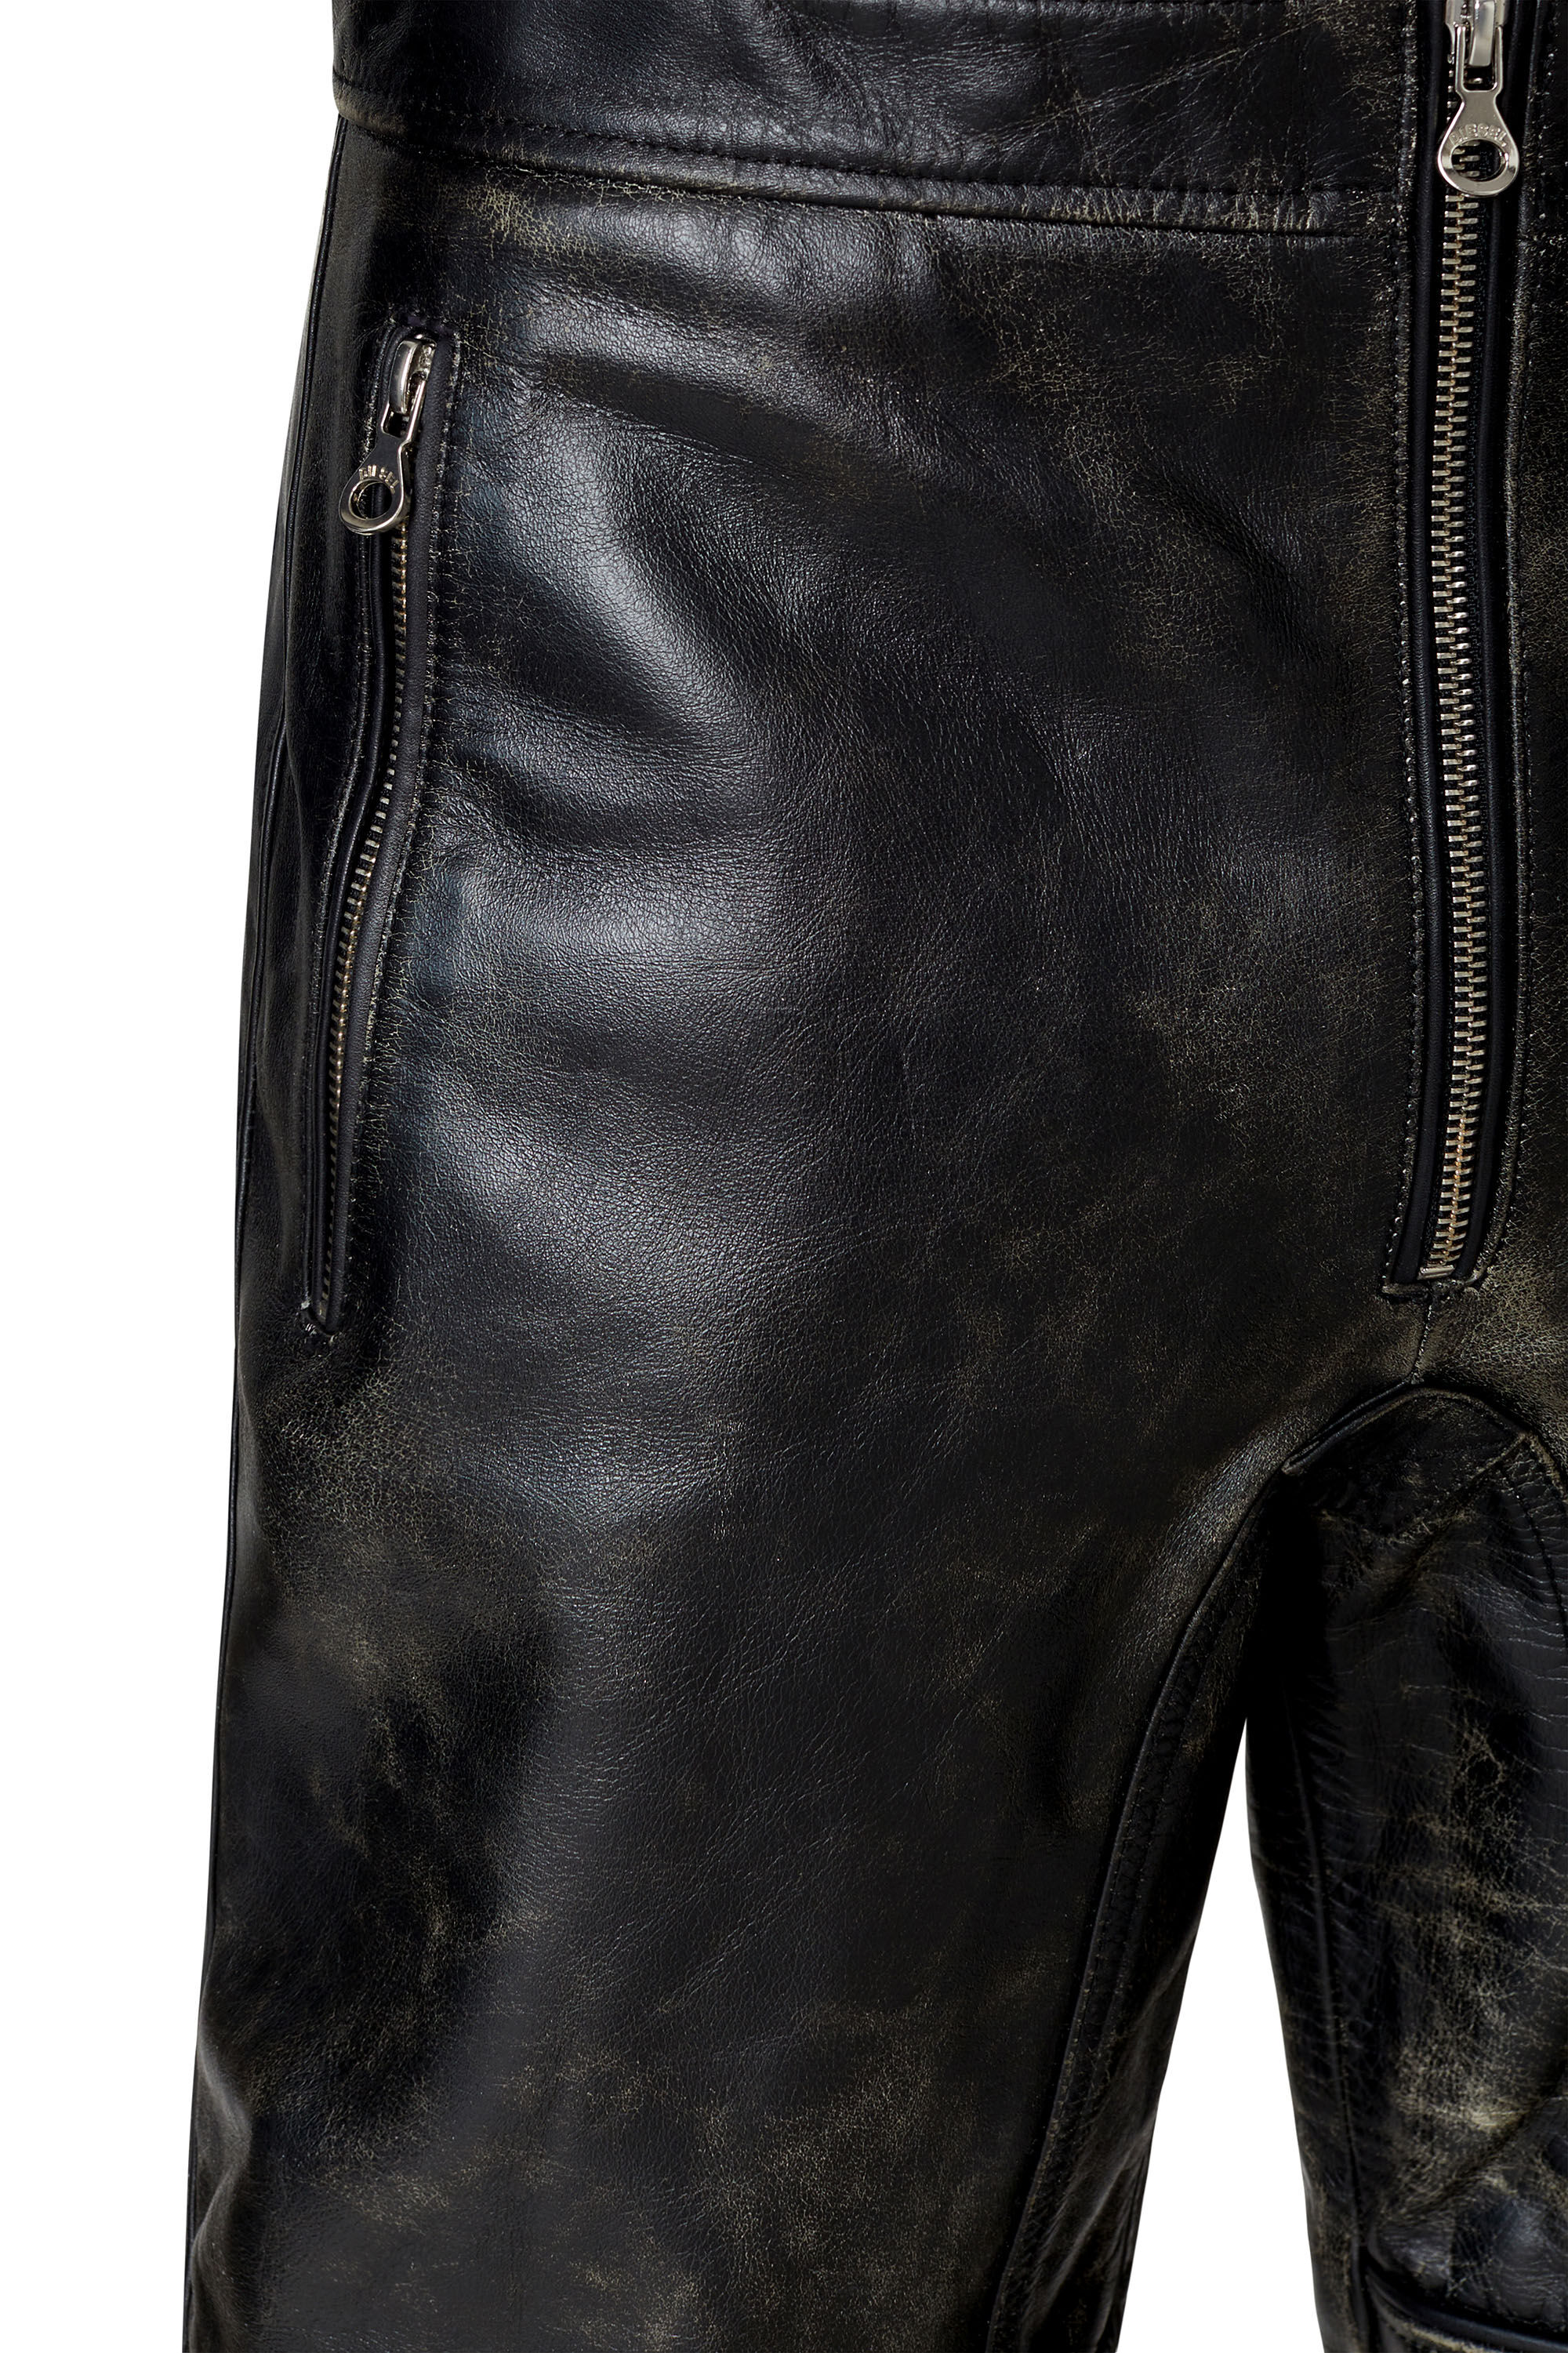 Leather trousers Rick Owens  Bolan banana pants  RP01C5362LGWDL09